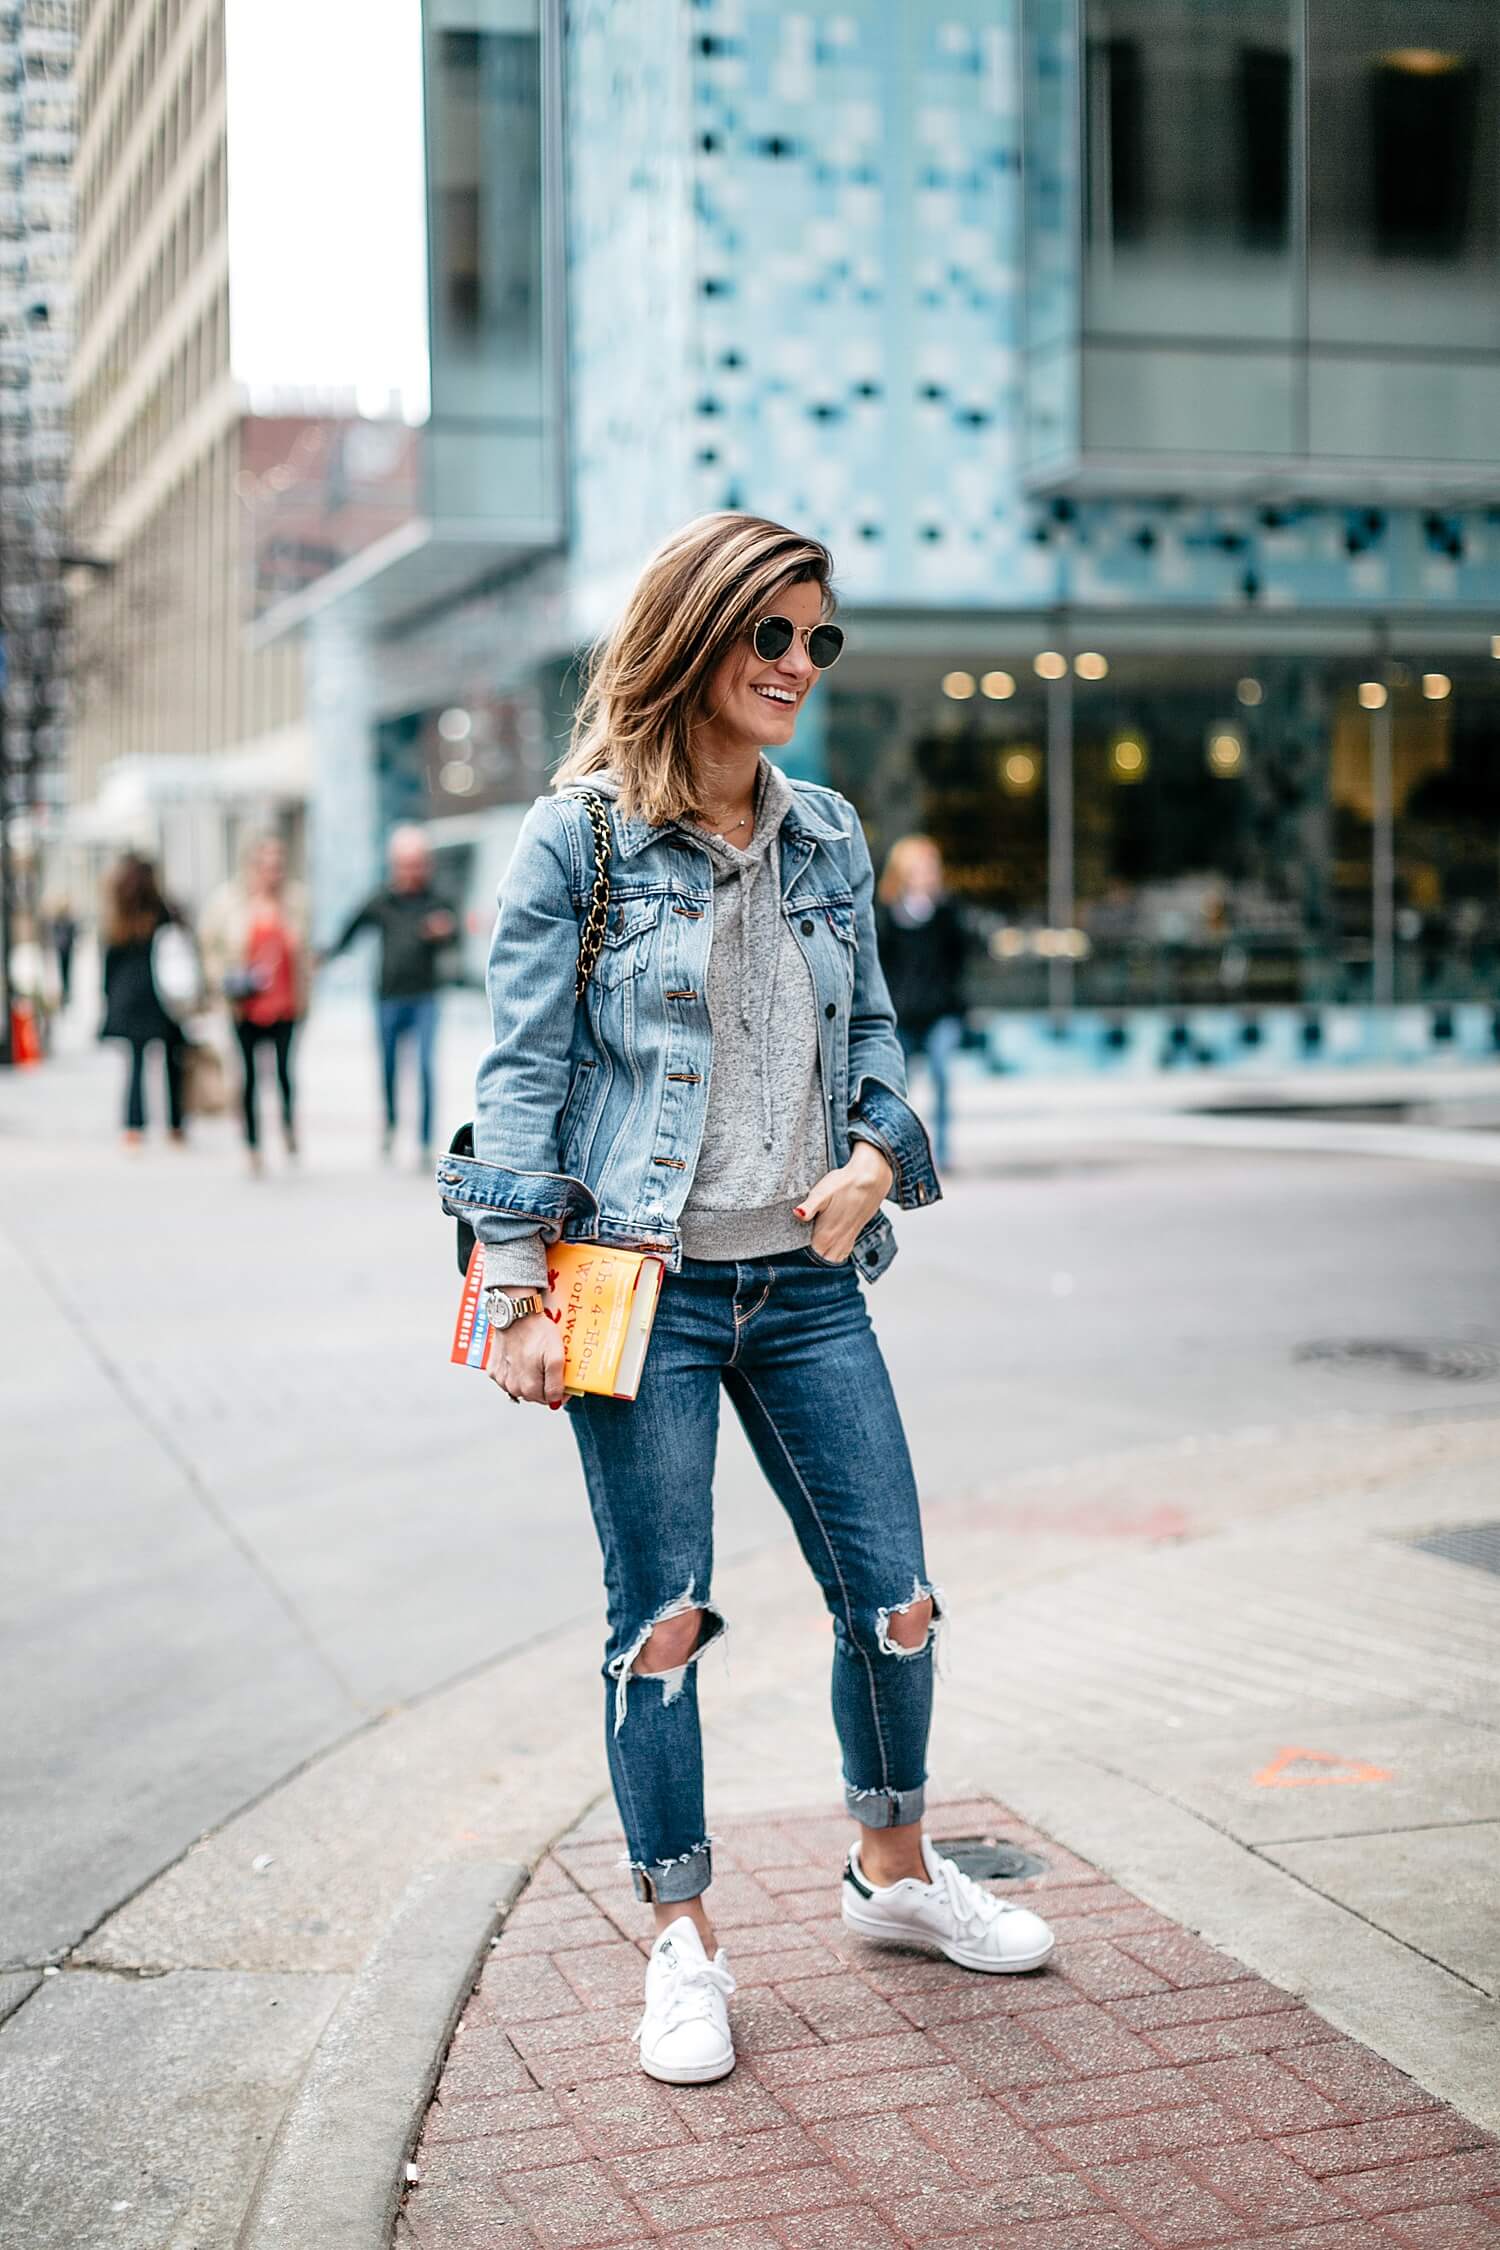 canadian tuxedo outfit with adidas stan smith sneakers